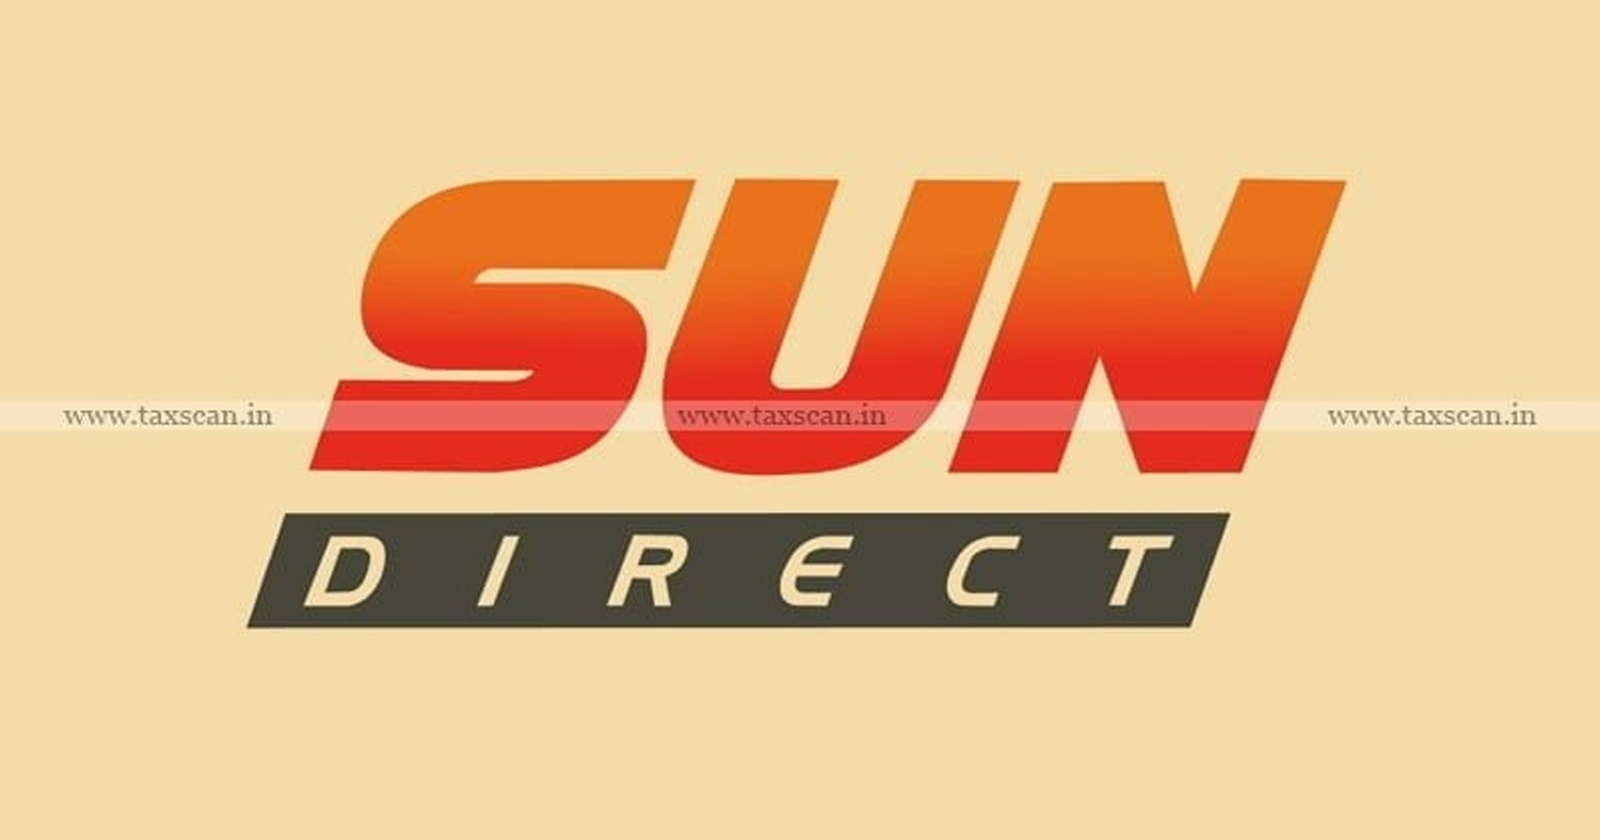 CESTAT - CESTAT Chennai - Sun Direct TV - service Tax - No service Tax on commission received from Sun Direct TV - Taxscan